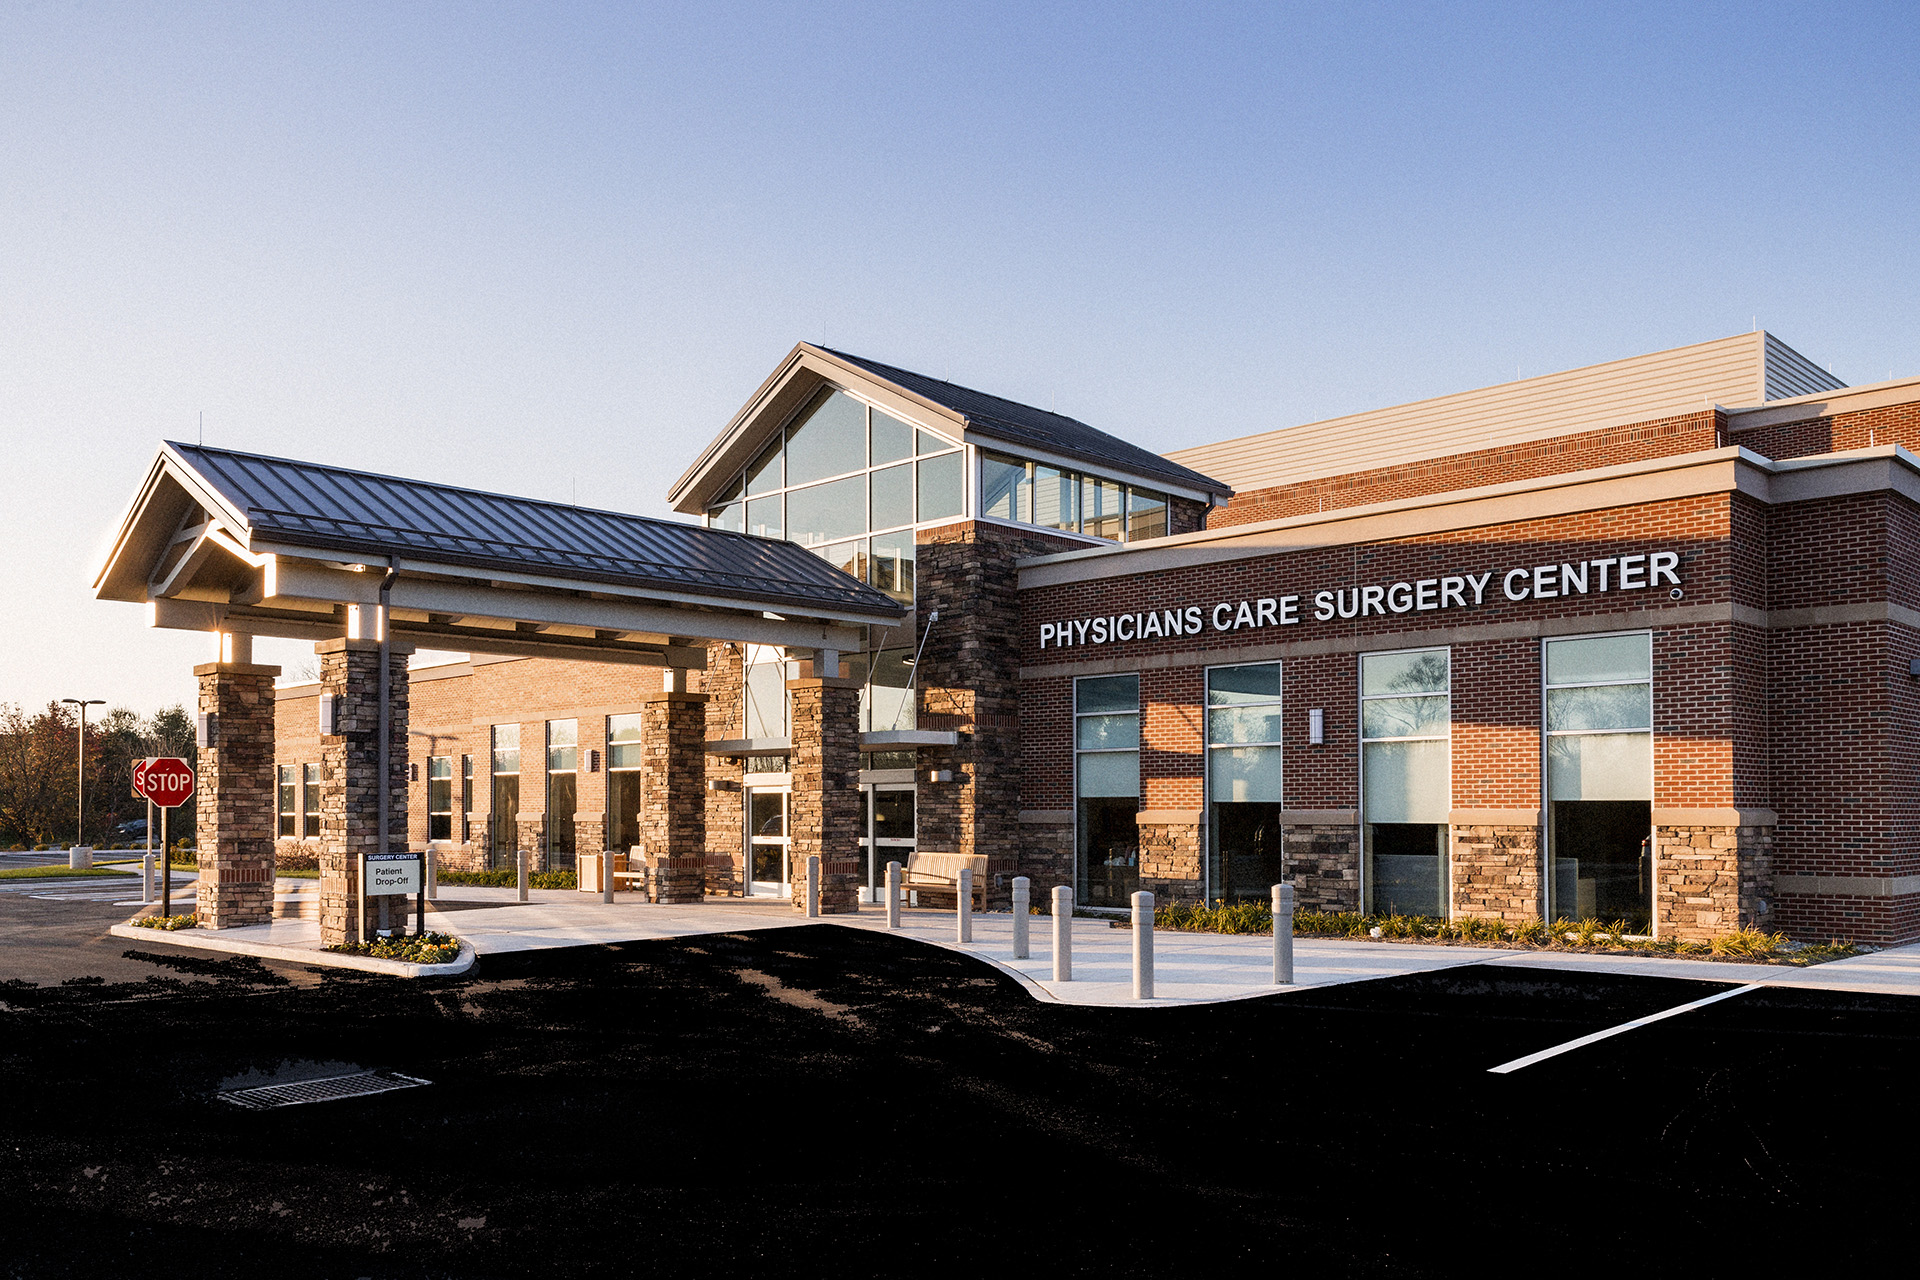 ValueHealth Opens Physicians Care Surgery Center, a Joint Venture with Rothman Orthopaedic Institute, Main Line Health, Jefferson Health and Local Physicians in Greater Philadelphia Area